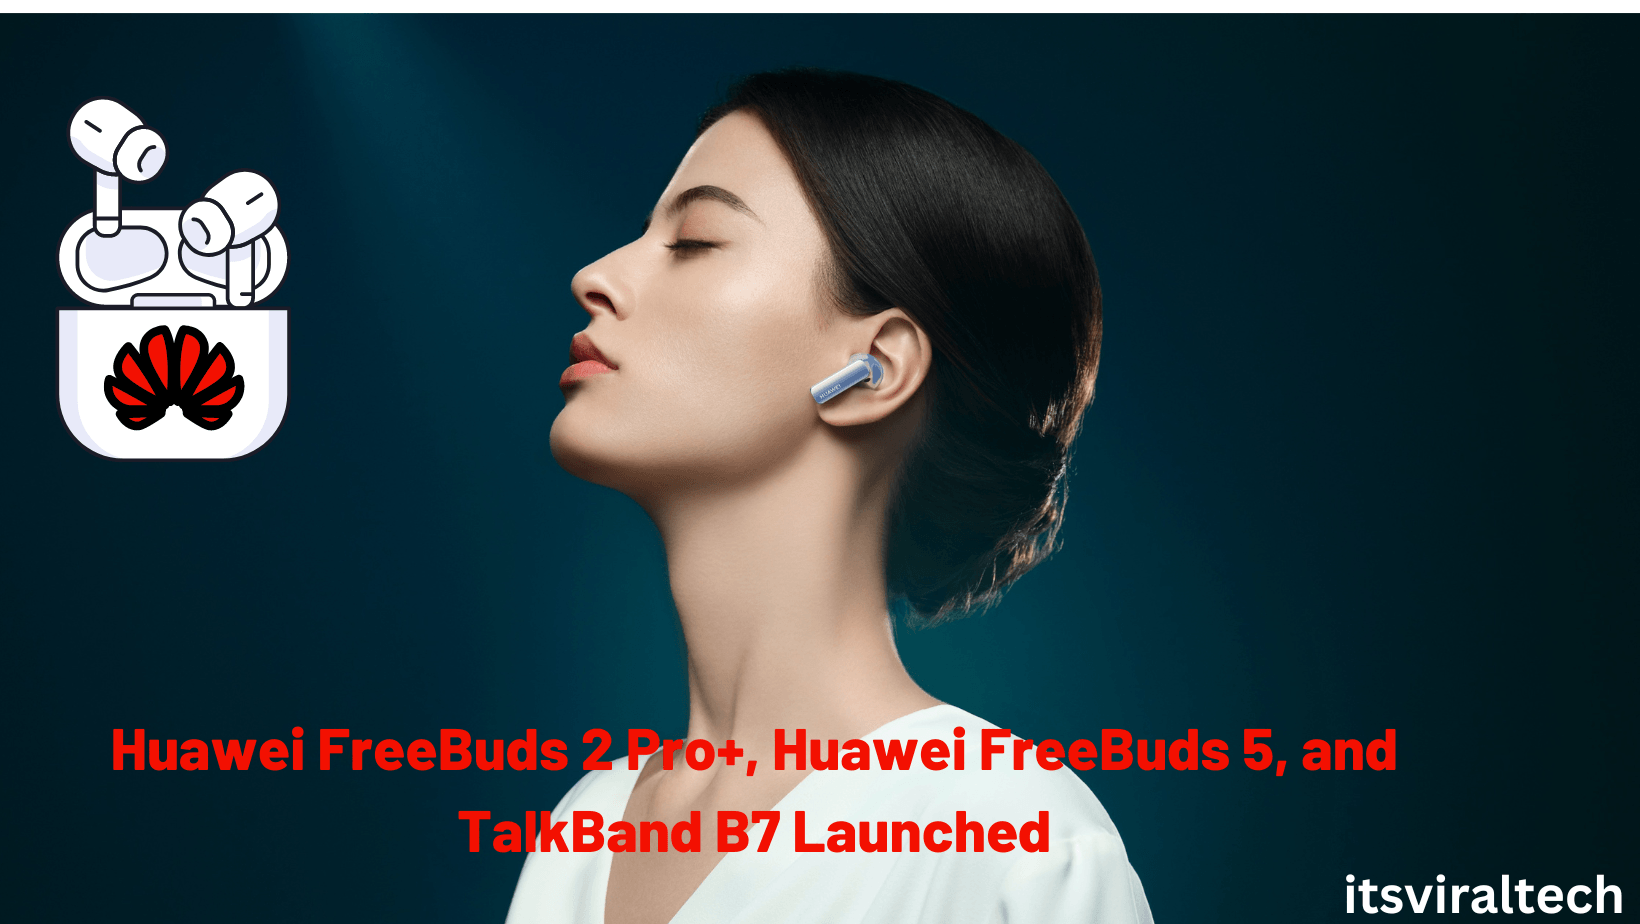 Huawei FreeBuds 2 Pro+, Huawei FreeBuds 5, and TalkBand B7 With Bluetooth Calling Launched: Details